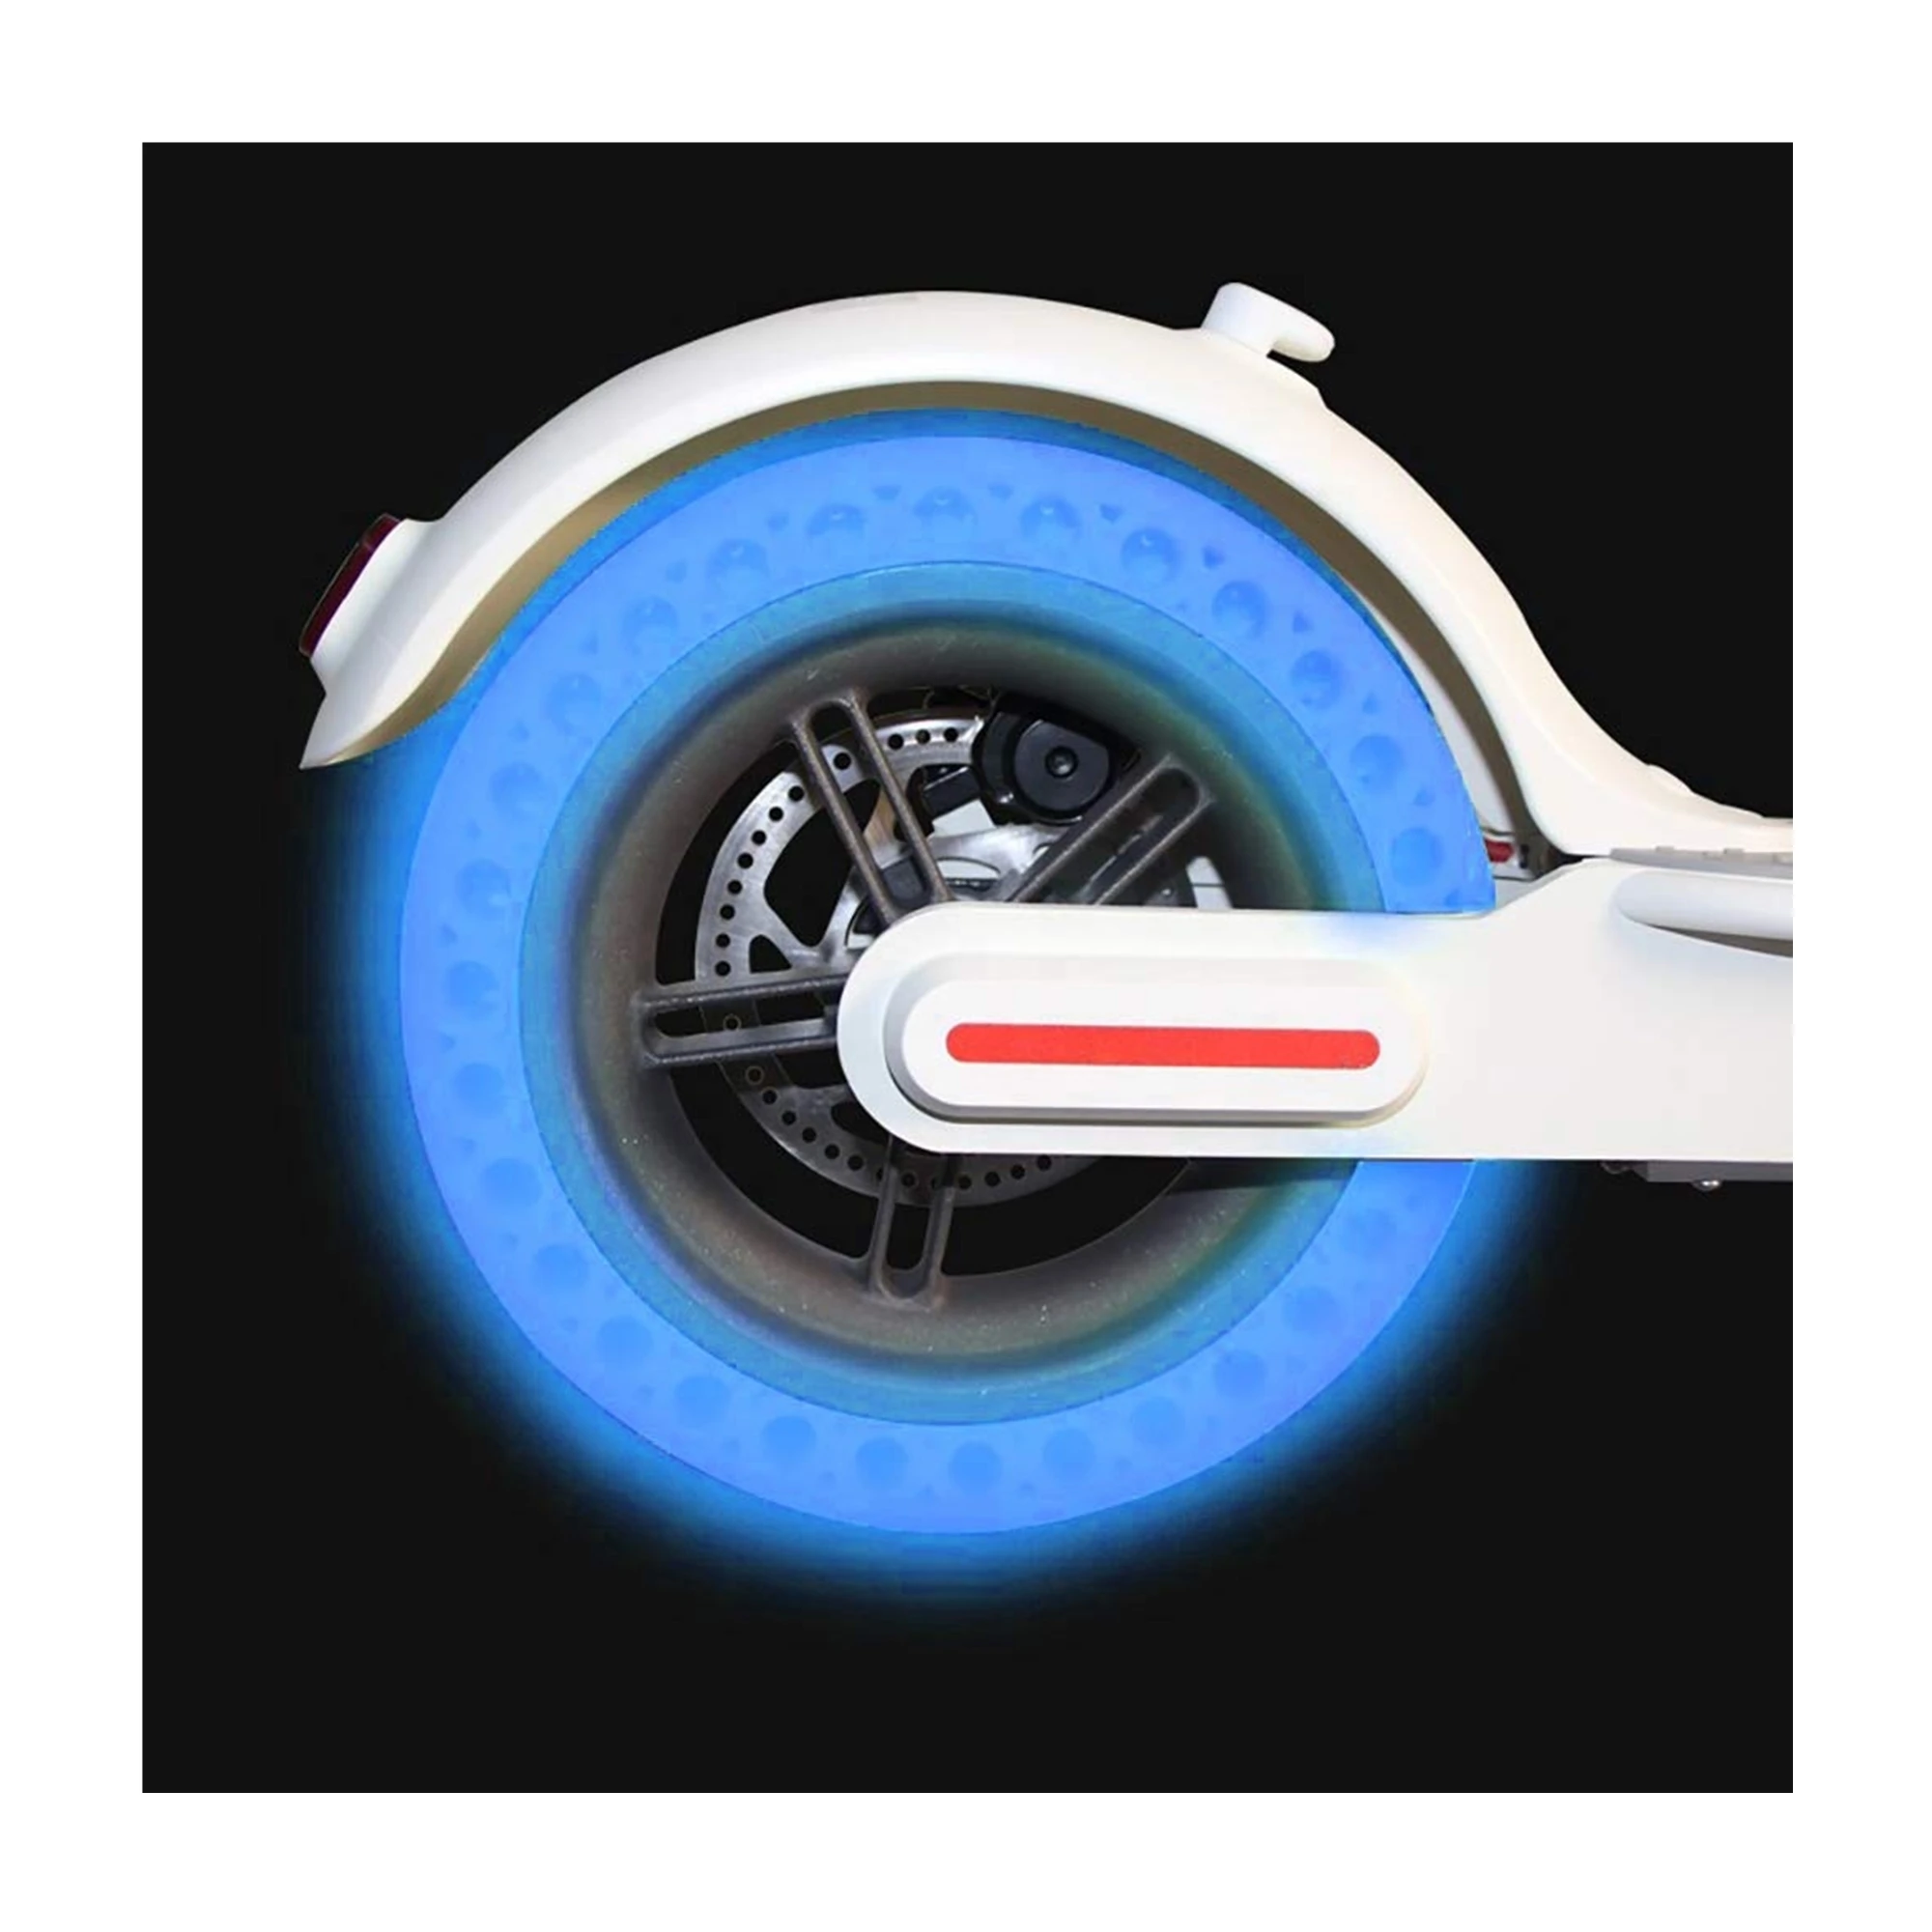 
2019 Tyre Explosion-Proof Fluorescent Solid Tire for Xiaomi mijia M365 parts Electric Scooter Accessories 